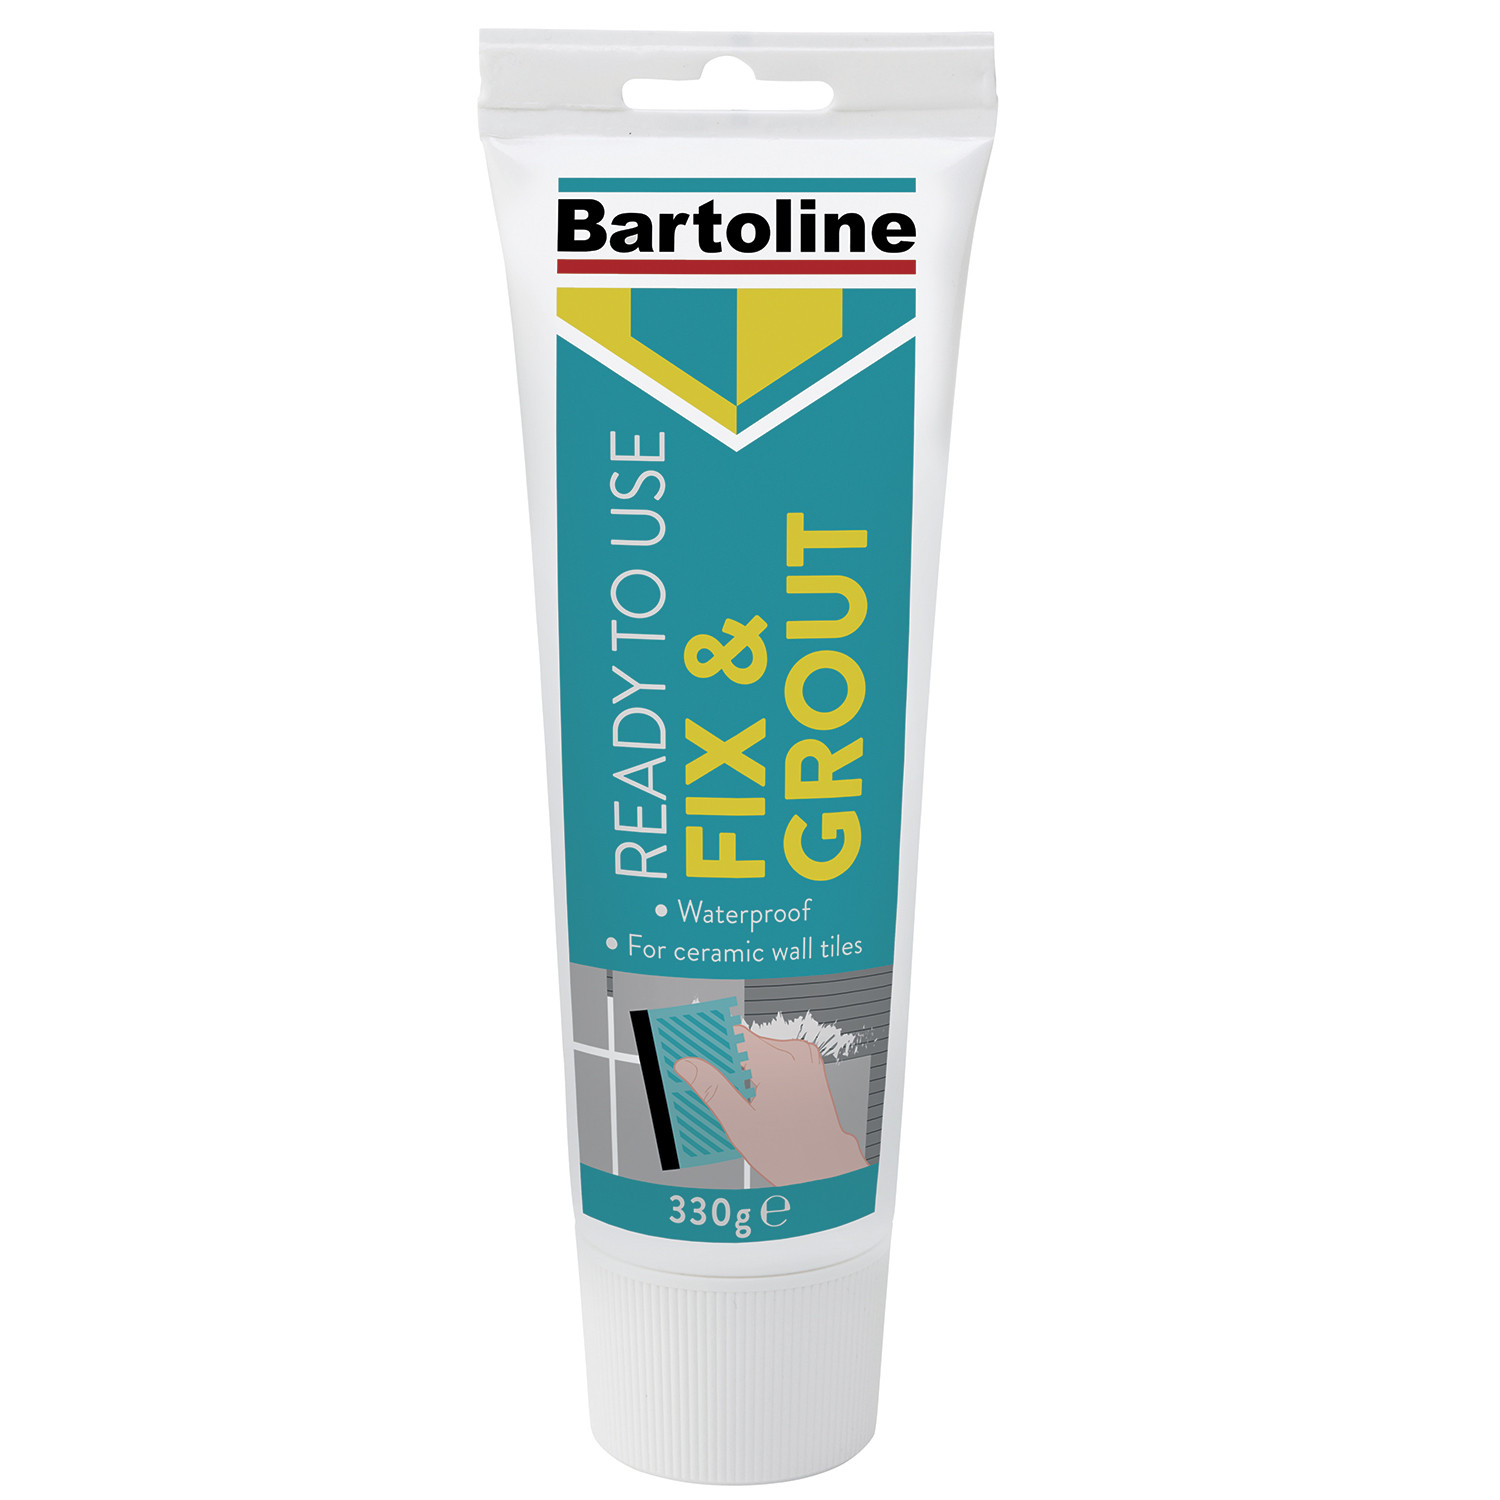 Bartoline Ready to Use Fix and Grout 330g Image